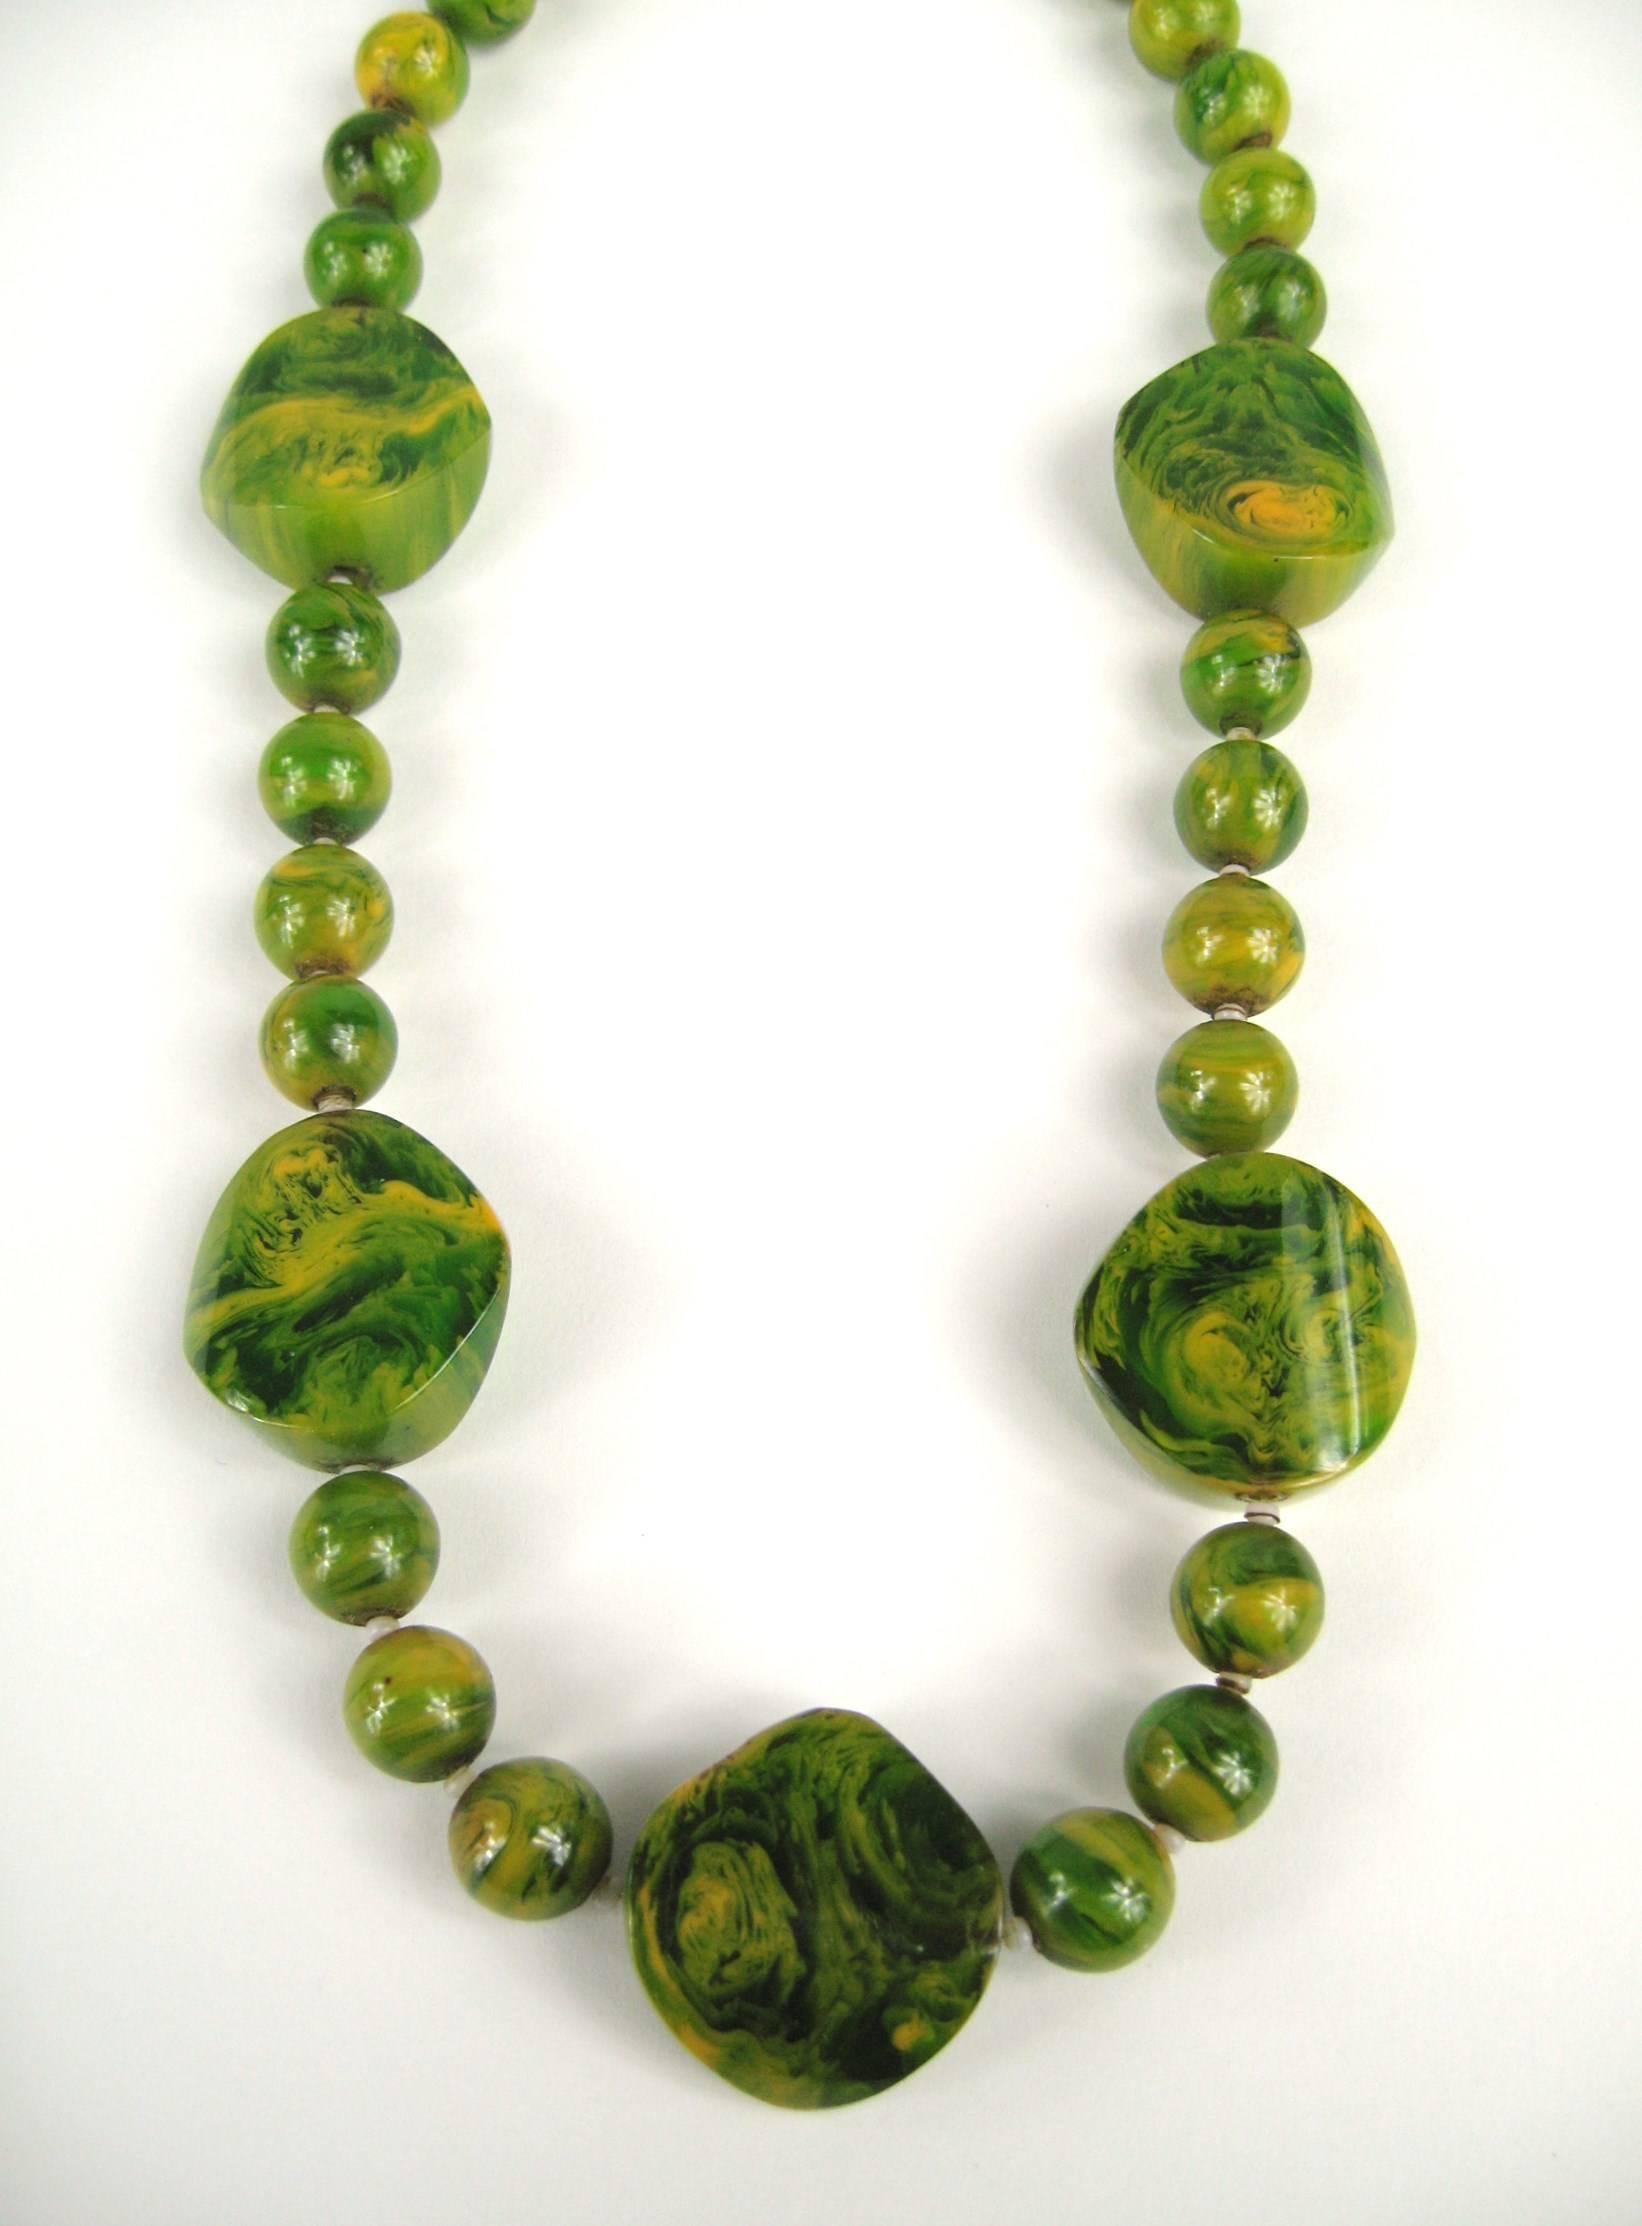 Vintage Green Bakelite / Catalin Necklace.Graduating round beads along with larger accent Bakelite bead. Beads 10.86 mm down to 10.36mm, Large disc beads are 24.78 mm x 24.66mm. Measuring 20 inches end to end with a Barrel screw closure. About 3